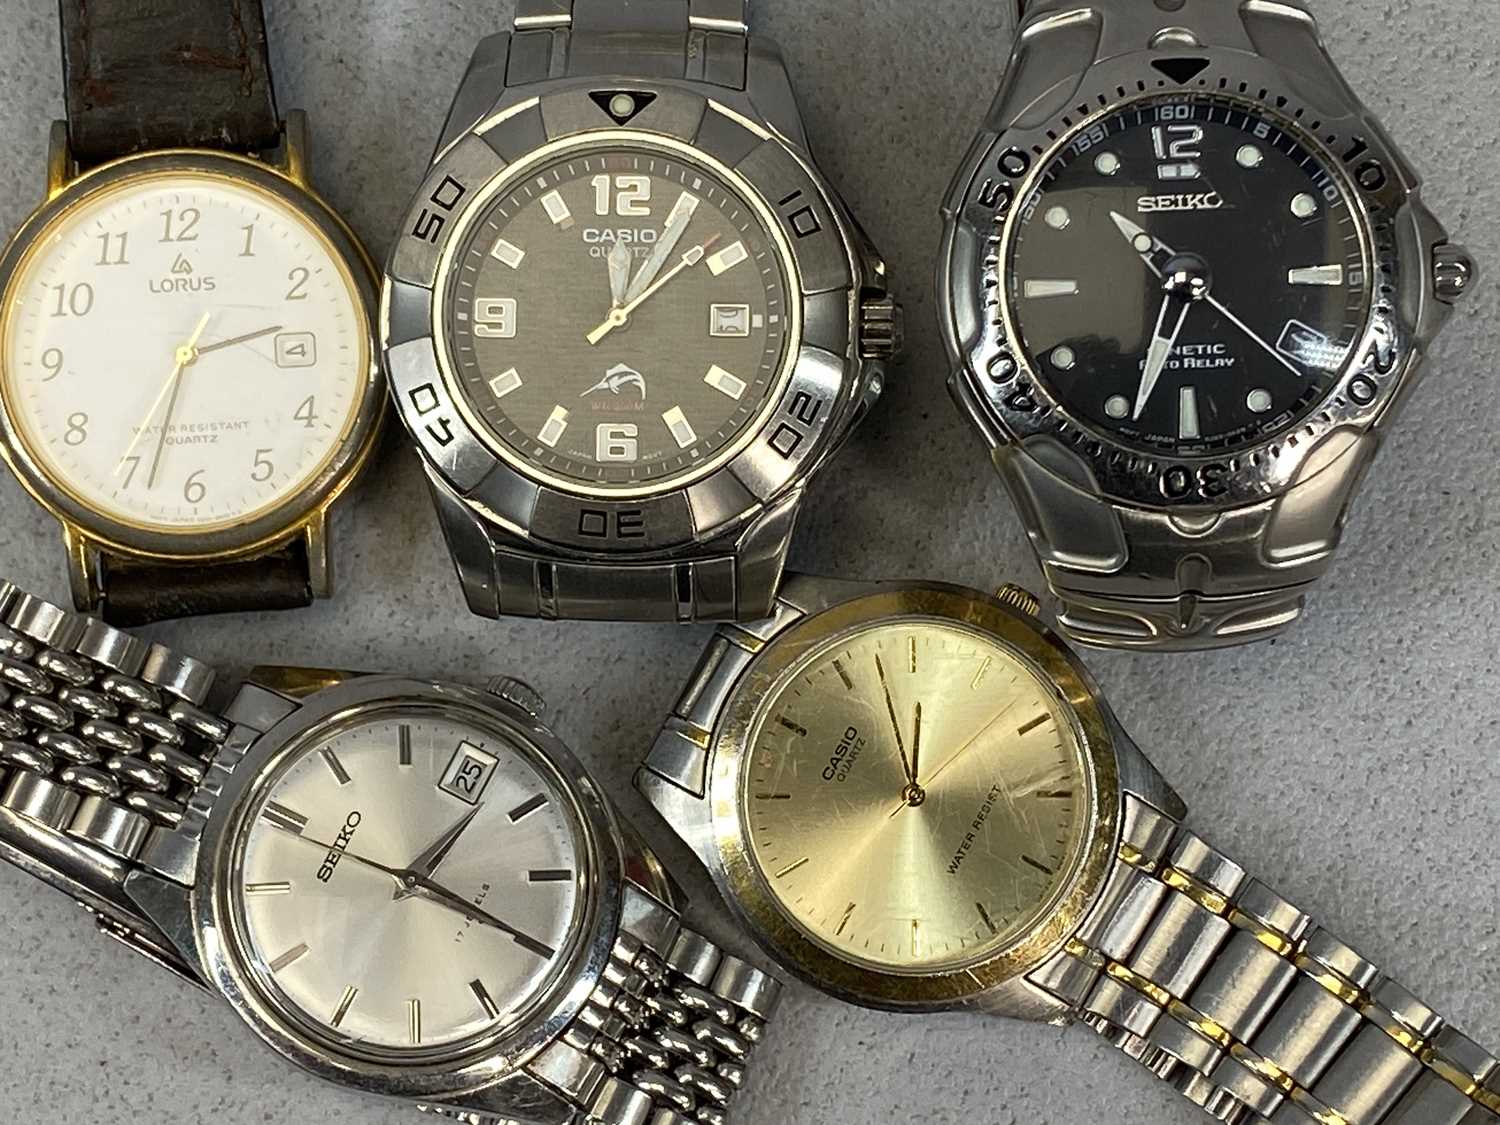 COLLECTION OF GENT'S WRISTWATCHES including Omega Deville gold plated bracelet watch, Seiko, - Image 6 of 8